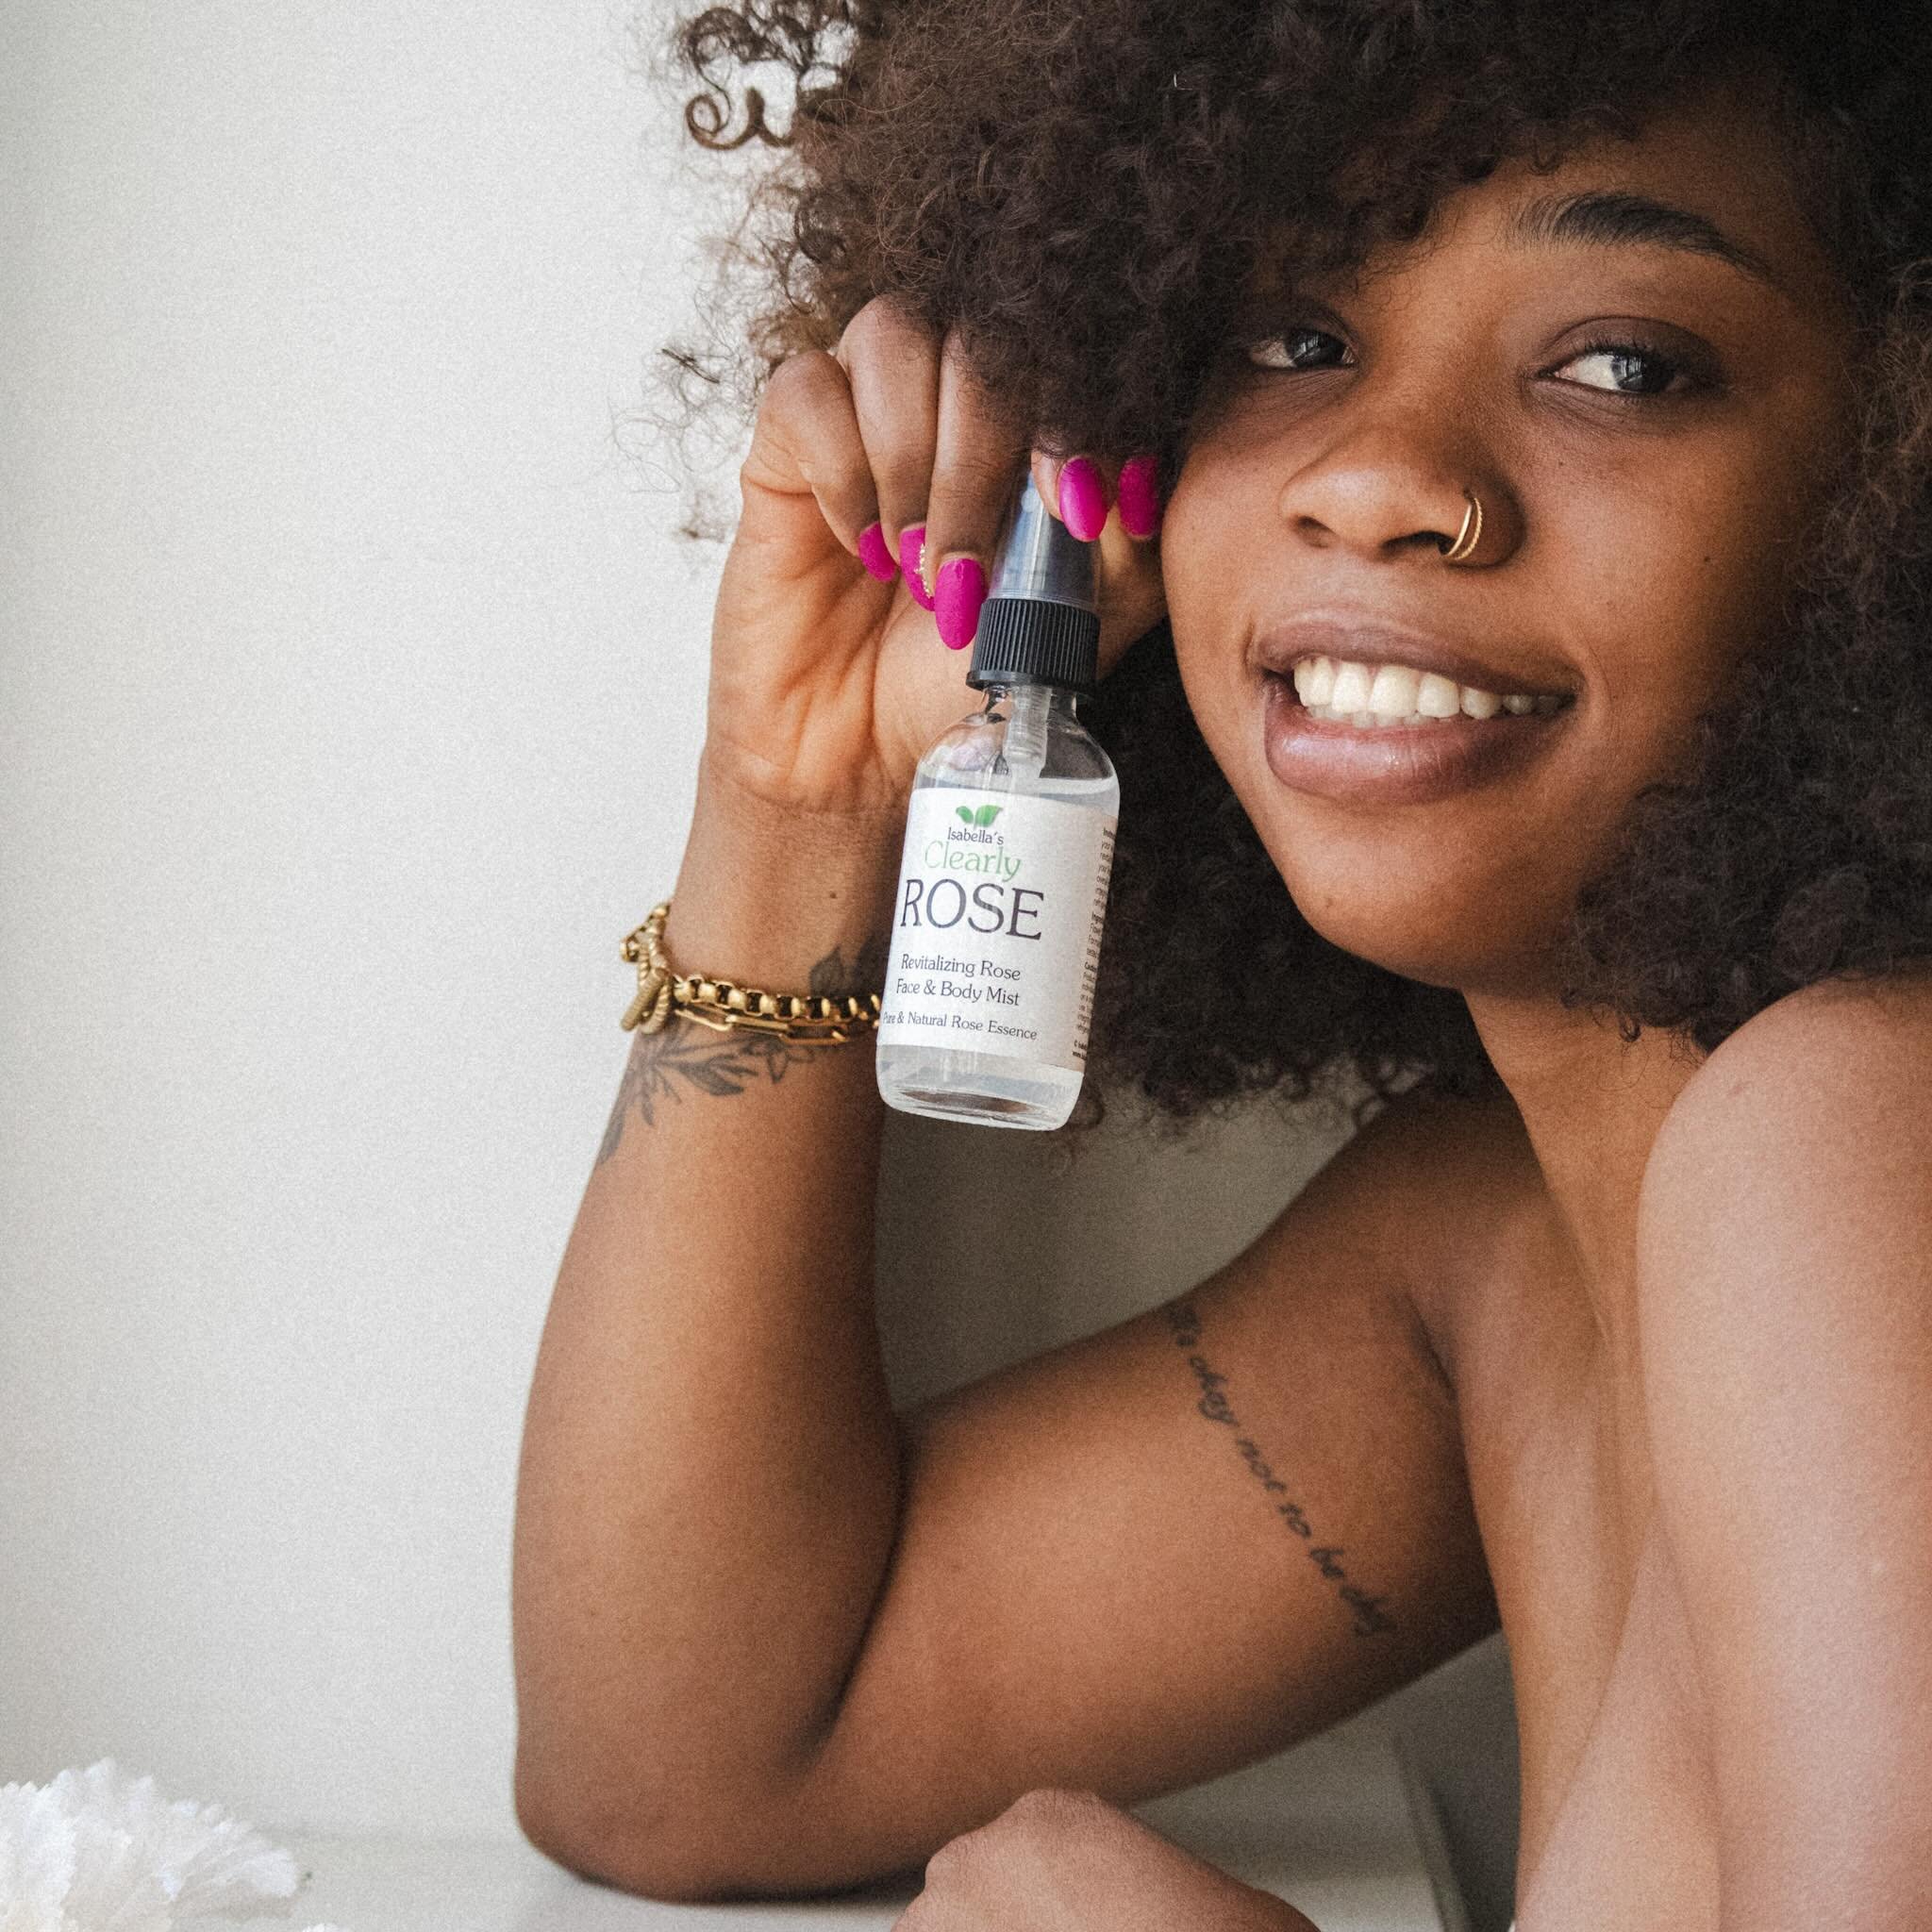 Summer is a round the corner. Add Clearly Rose to your summer routine! 🌞 Keep your skin hydrated while feeling fresh and smelling good. This is your ultimate bestie for the sunny and warm days. 

#AllNatural #Summer #hydratedskin #womenownedbusiness